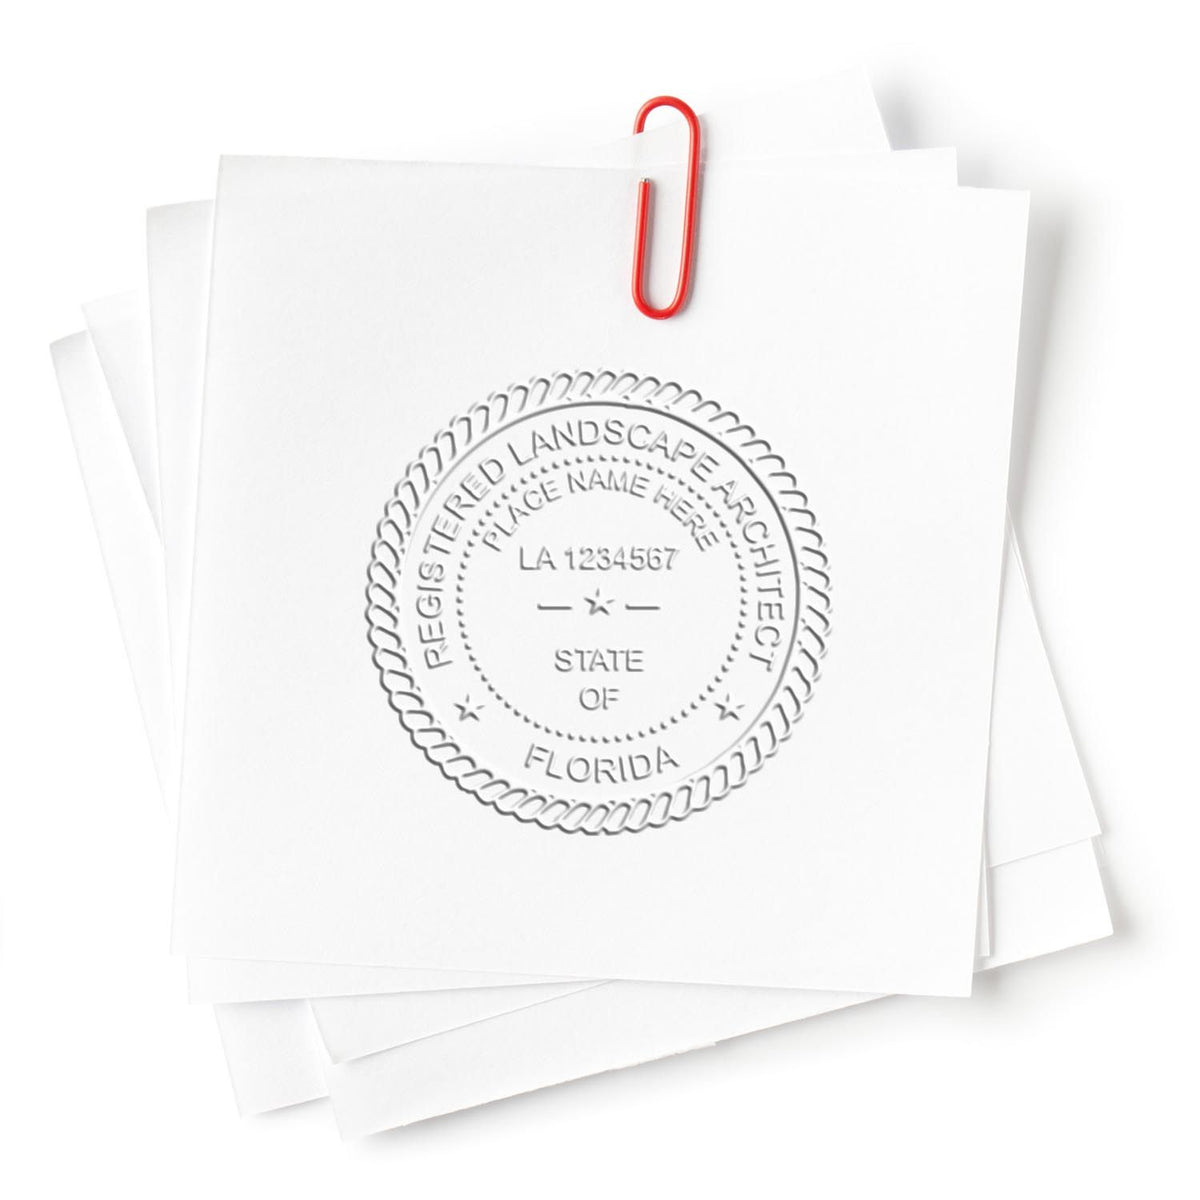 An in use photo of the Gift Florida Landscape Architect Seal showing a sample imprint on a cardstock